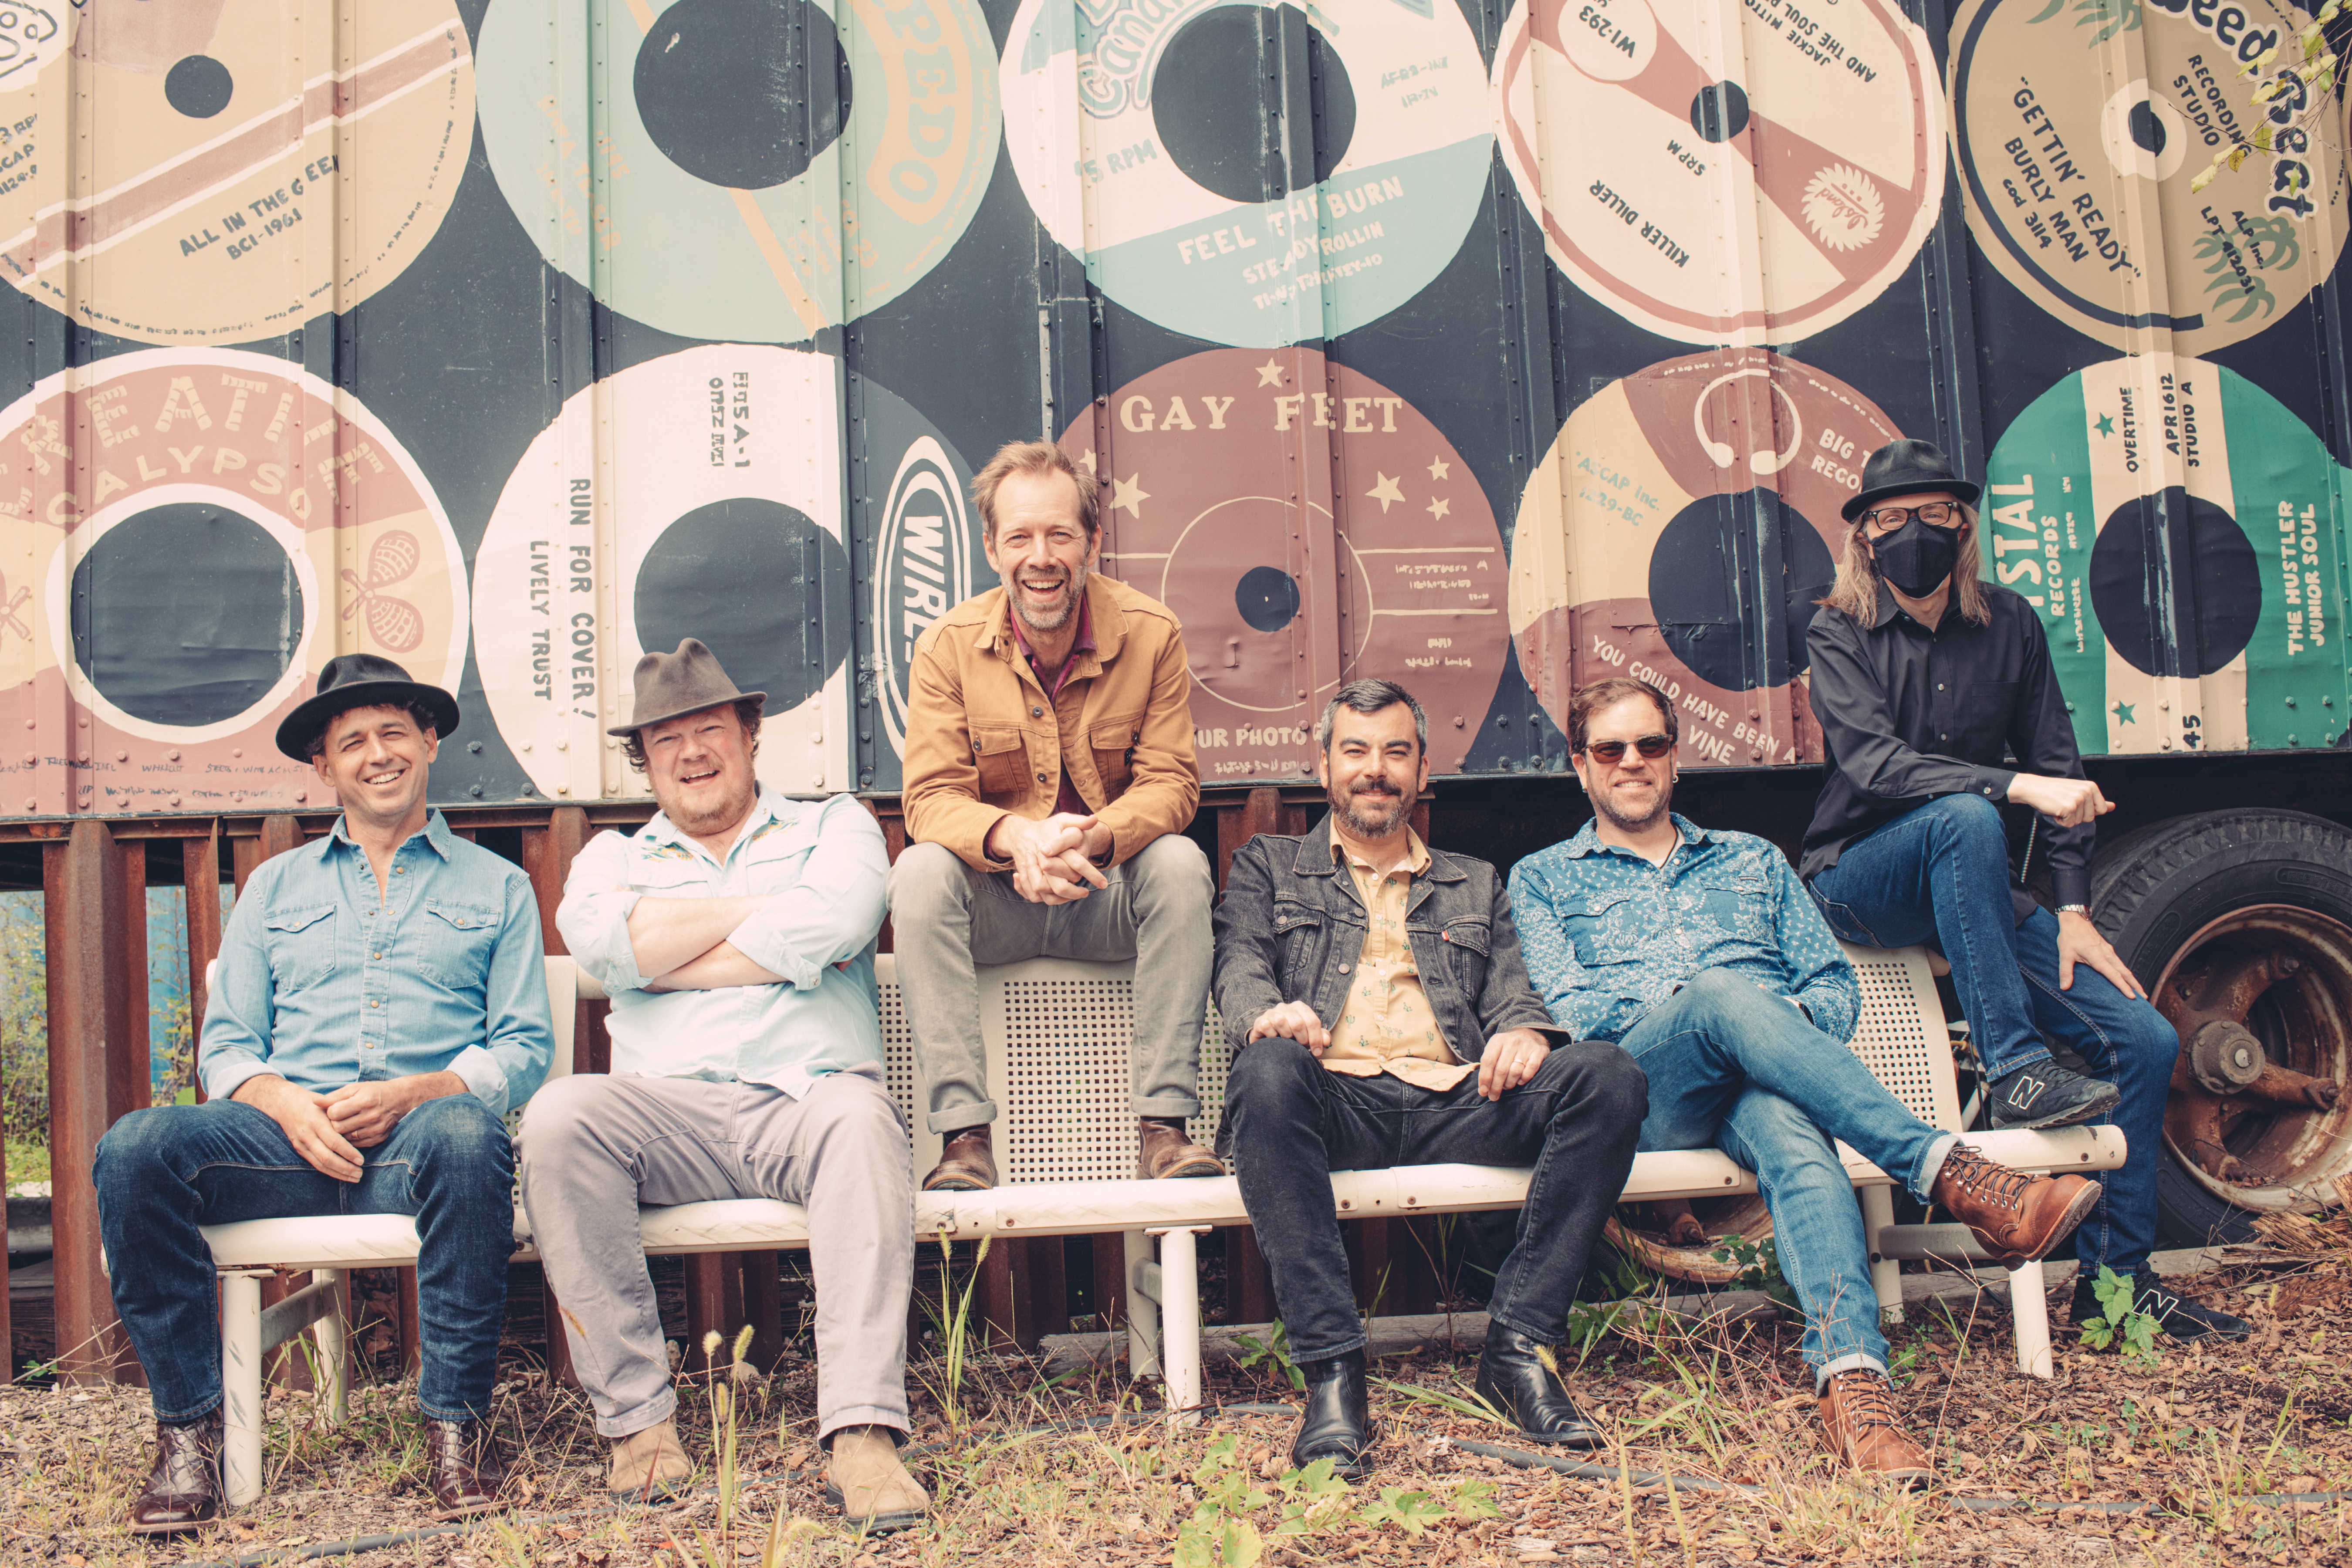 The six members of Steep Canyon Rangers sit in front of a barn wall, painted with images of 78s